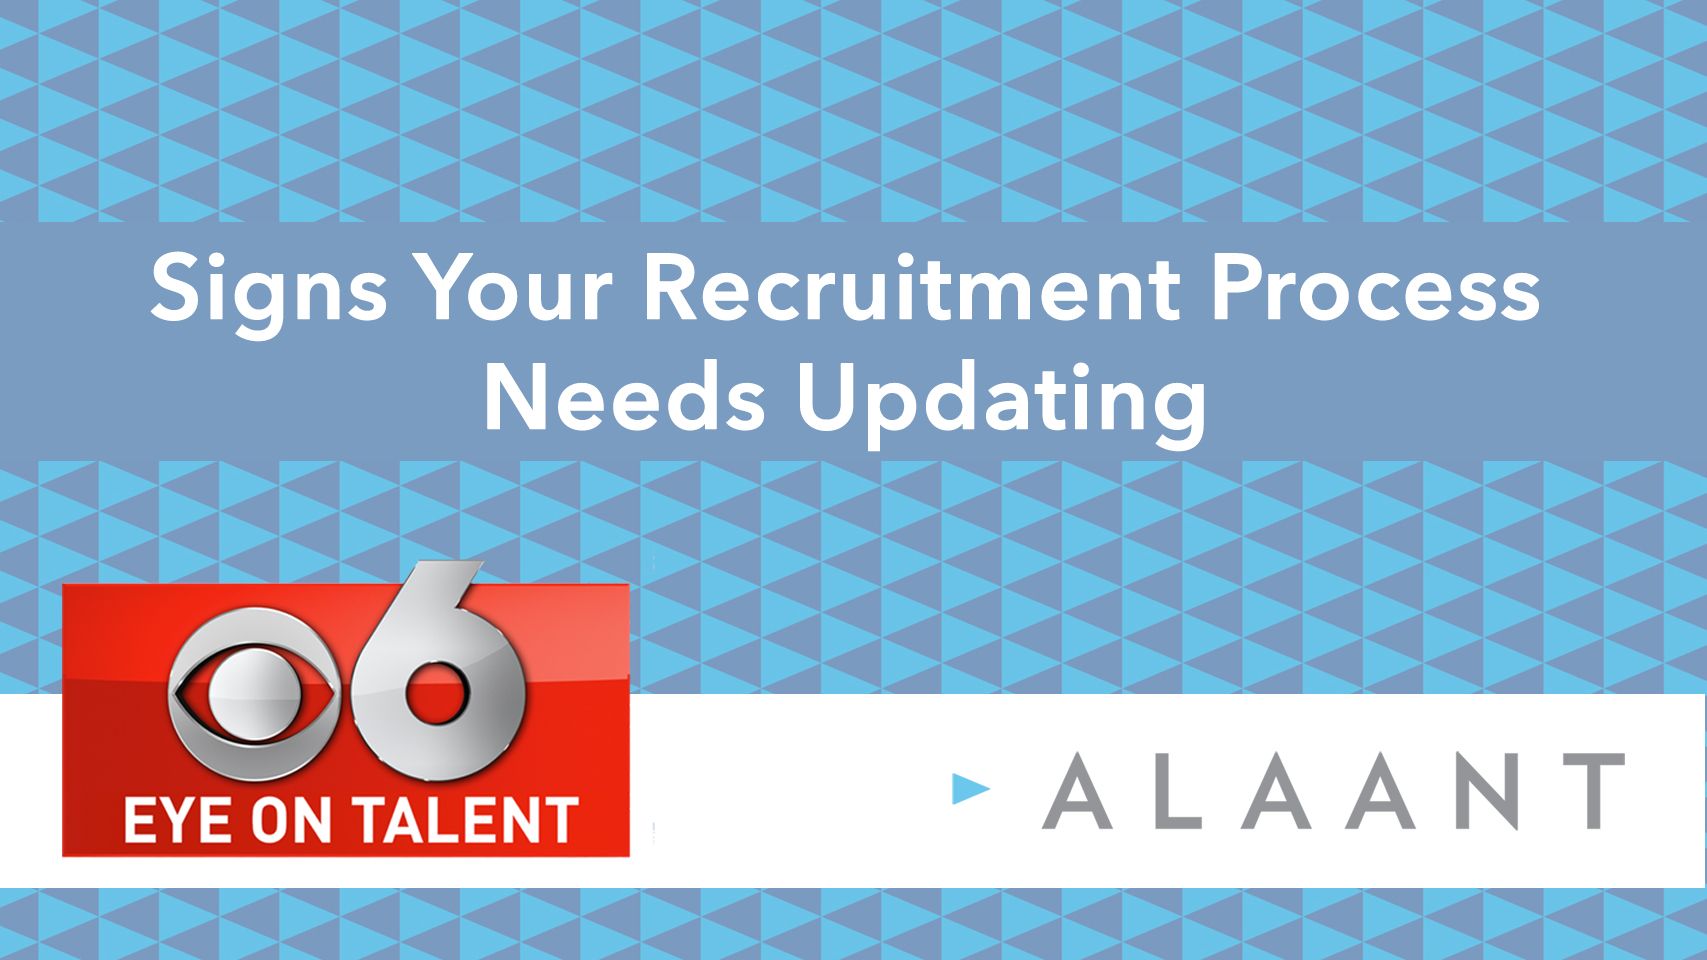 Alaant Eye on Talent: Signs Your Recruitment Process Needs Updating